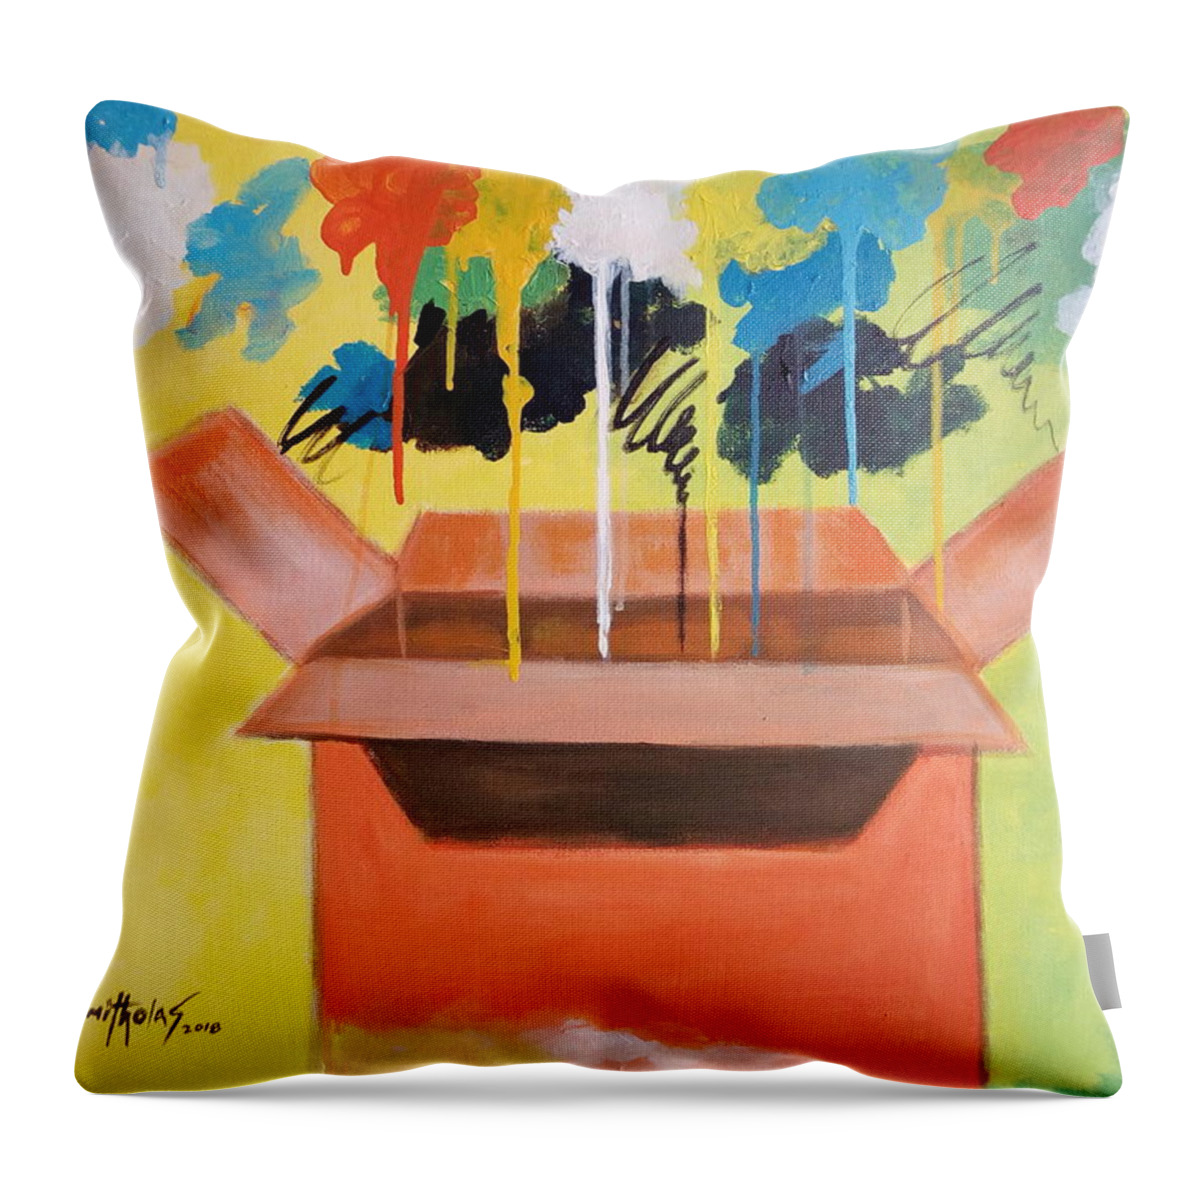 Living Room Throw Pillow featuring the painting Color Drop by Olaoluwa Smith